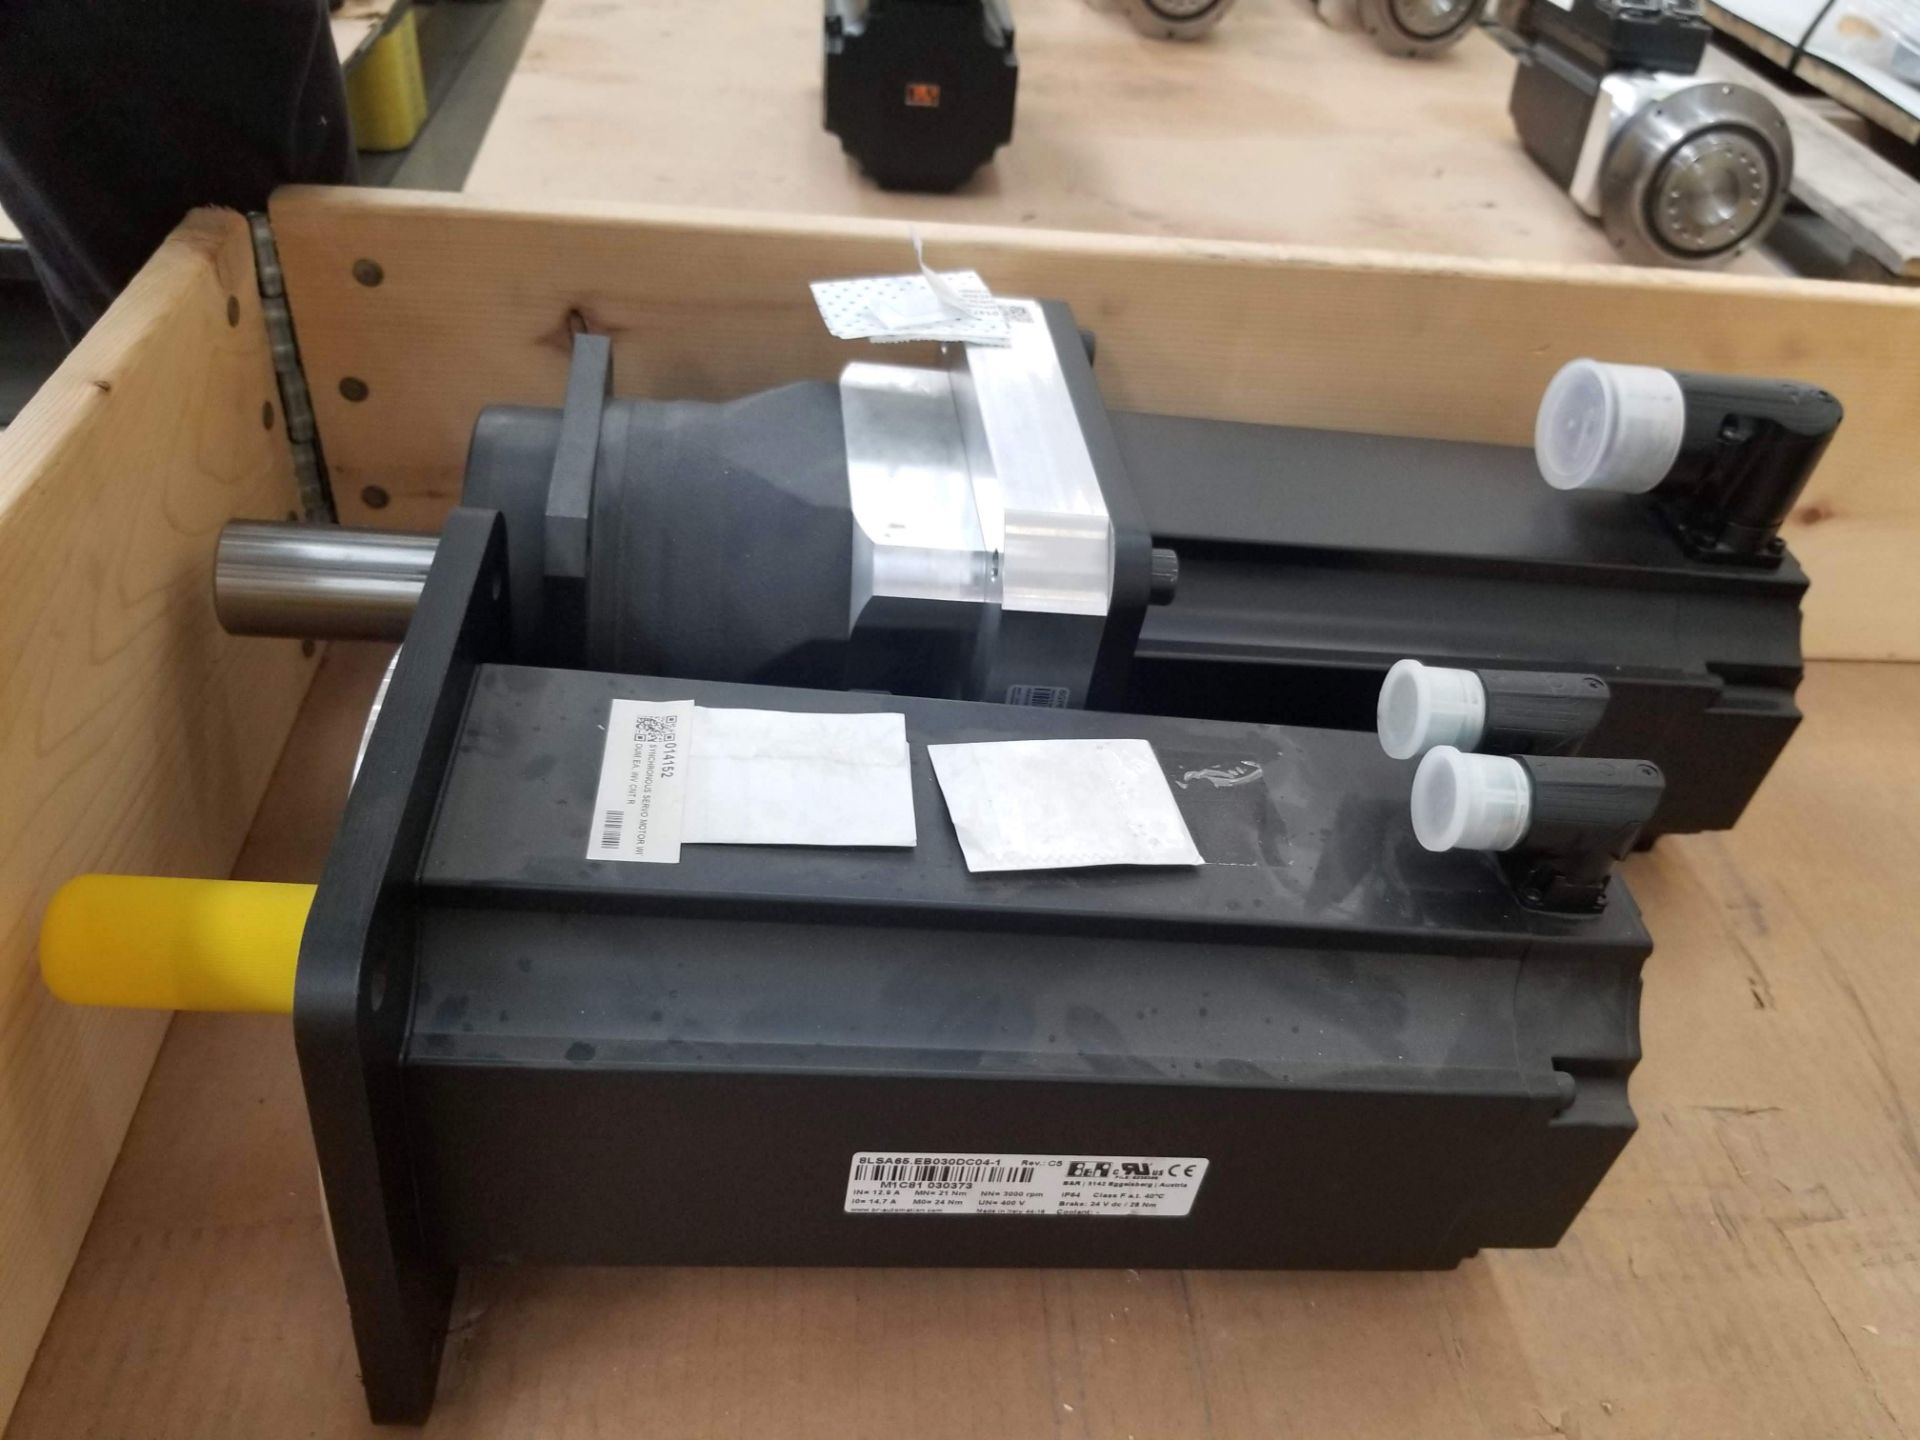 LOT - (6) B&R MOTOR & GEARBOX, SHUTTER N350. MOTOR & GEARBOX ROBOT. SERVOMOTOR AND GEARBOX. - Image 17 of 21